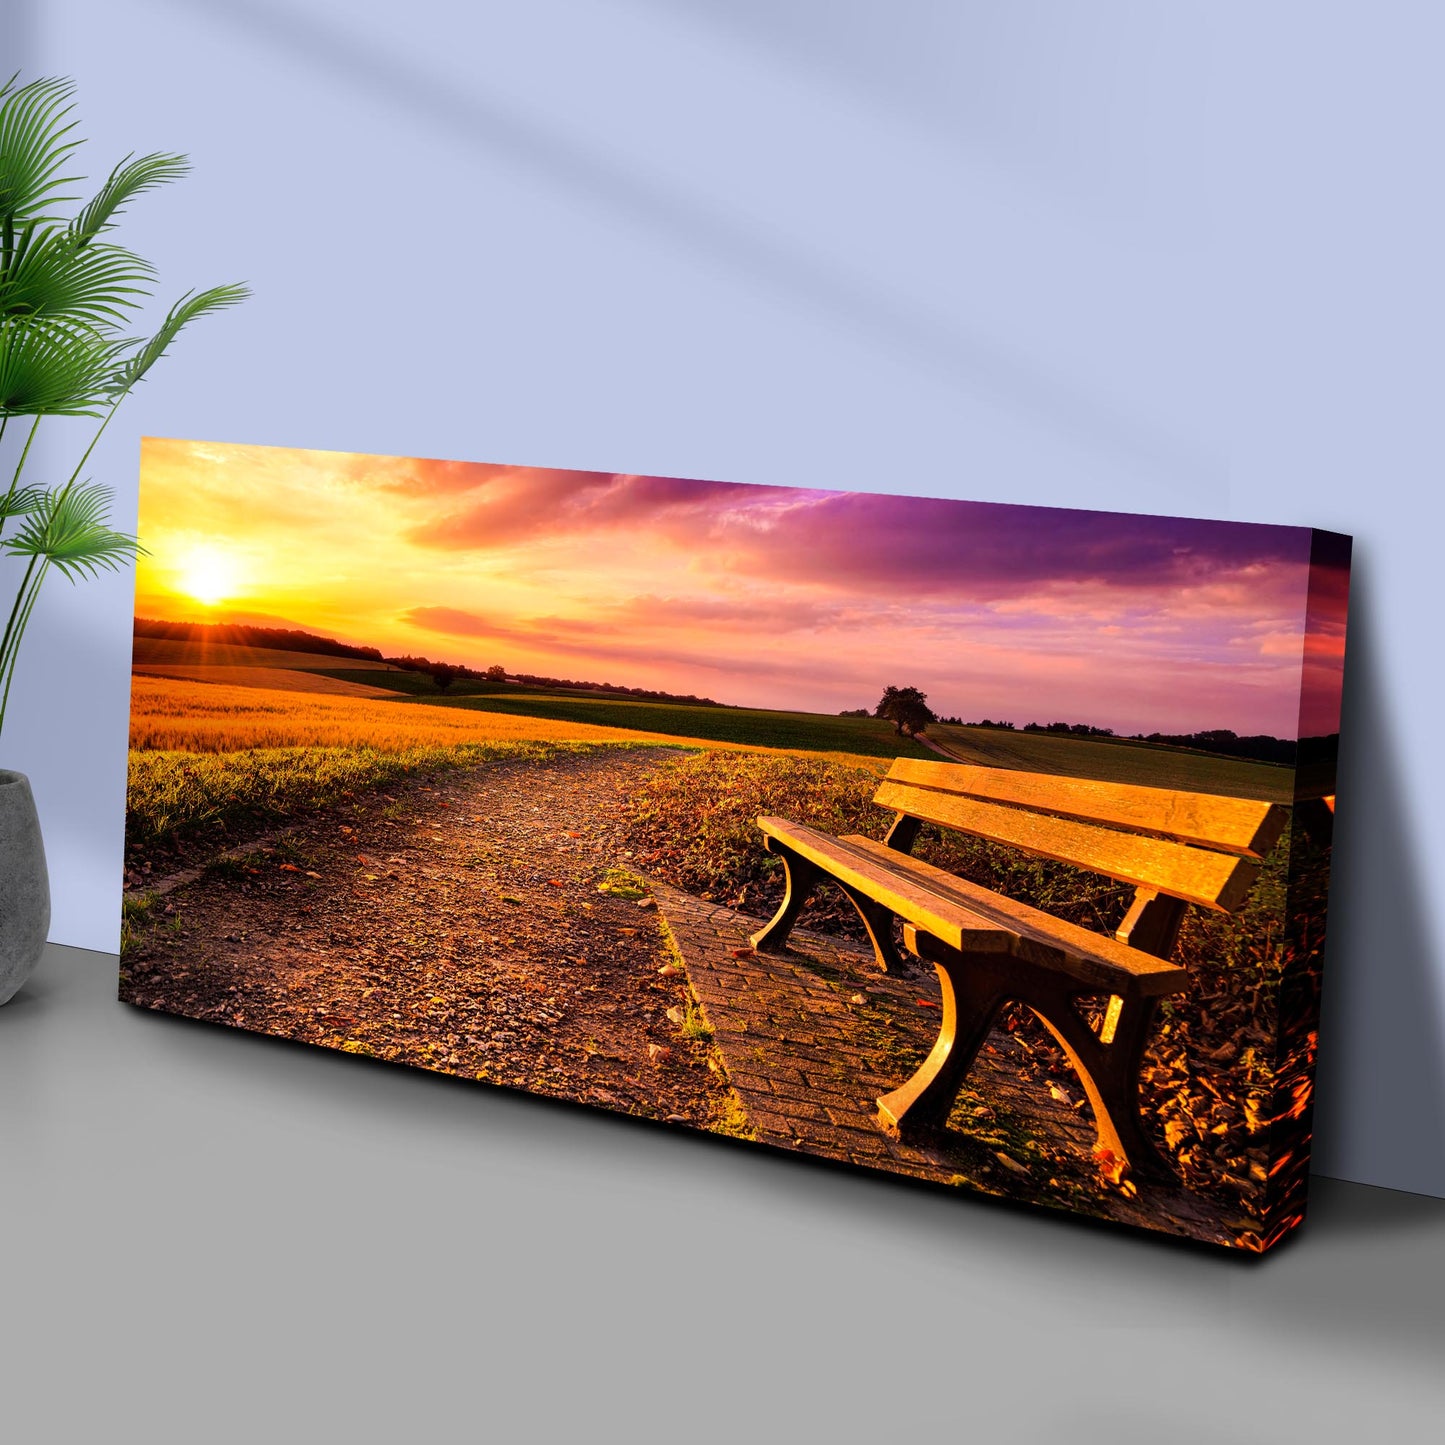 Idyllic Sunset Field Canvas Wall Art Style 1 - Image by Tailored Canvases